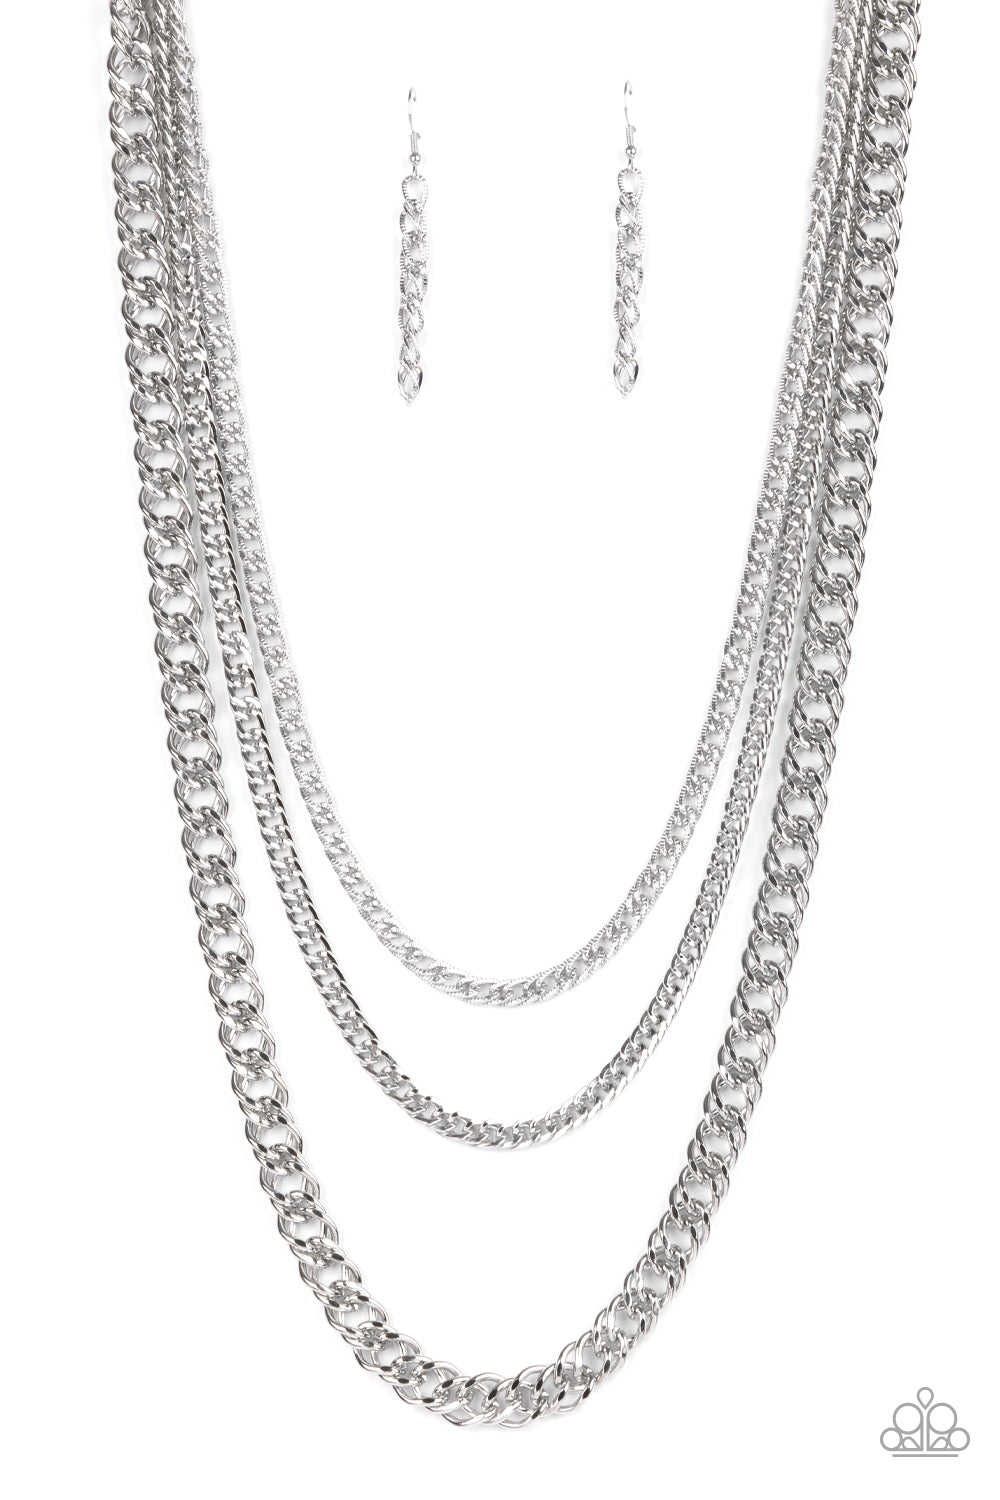 Chain of Champions - Silver ***COMING SOON*** - Bling With Crystal